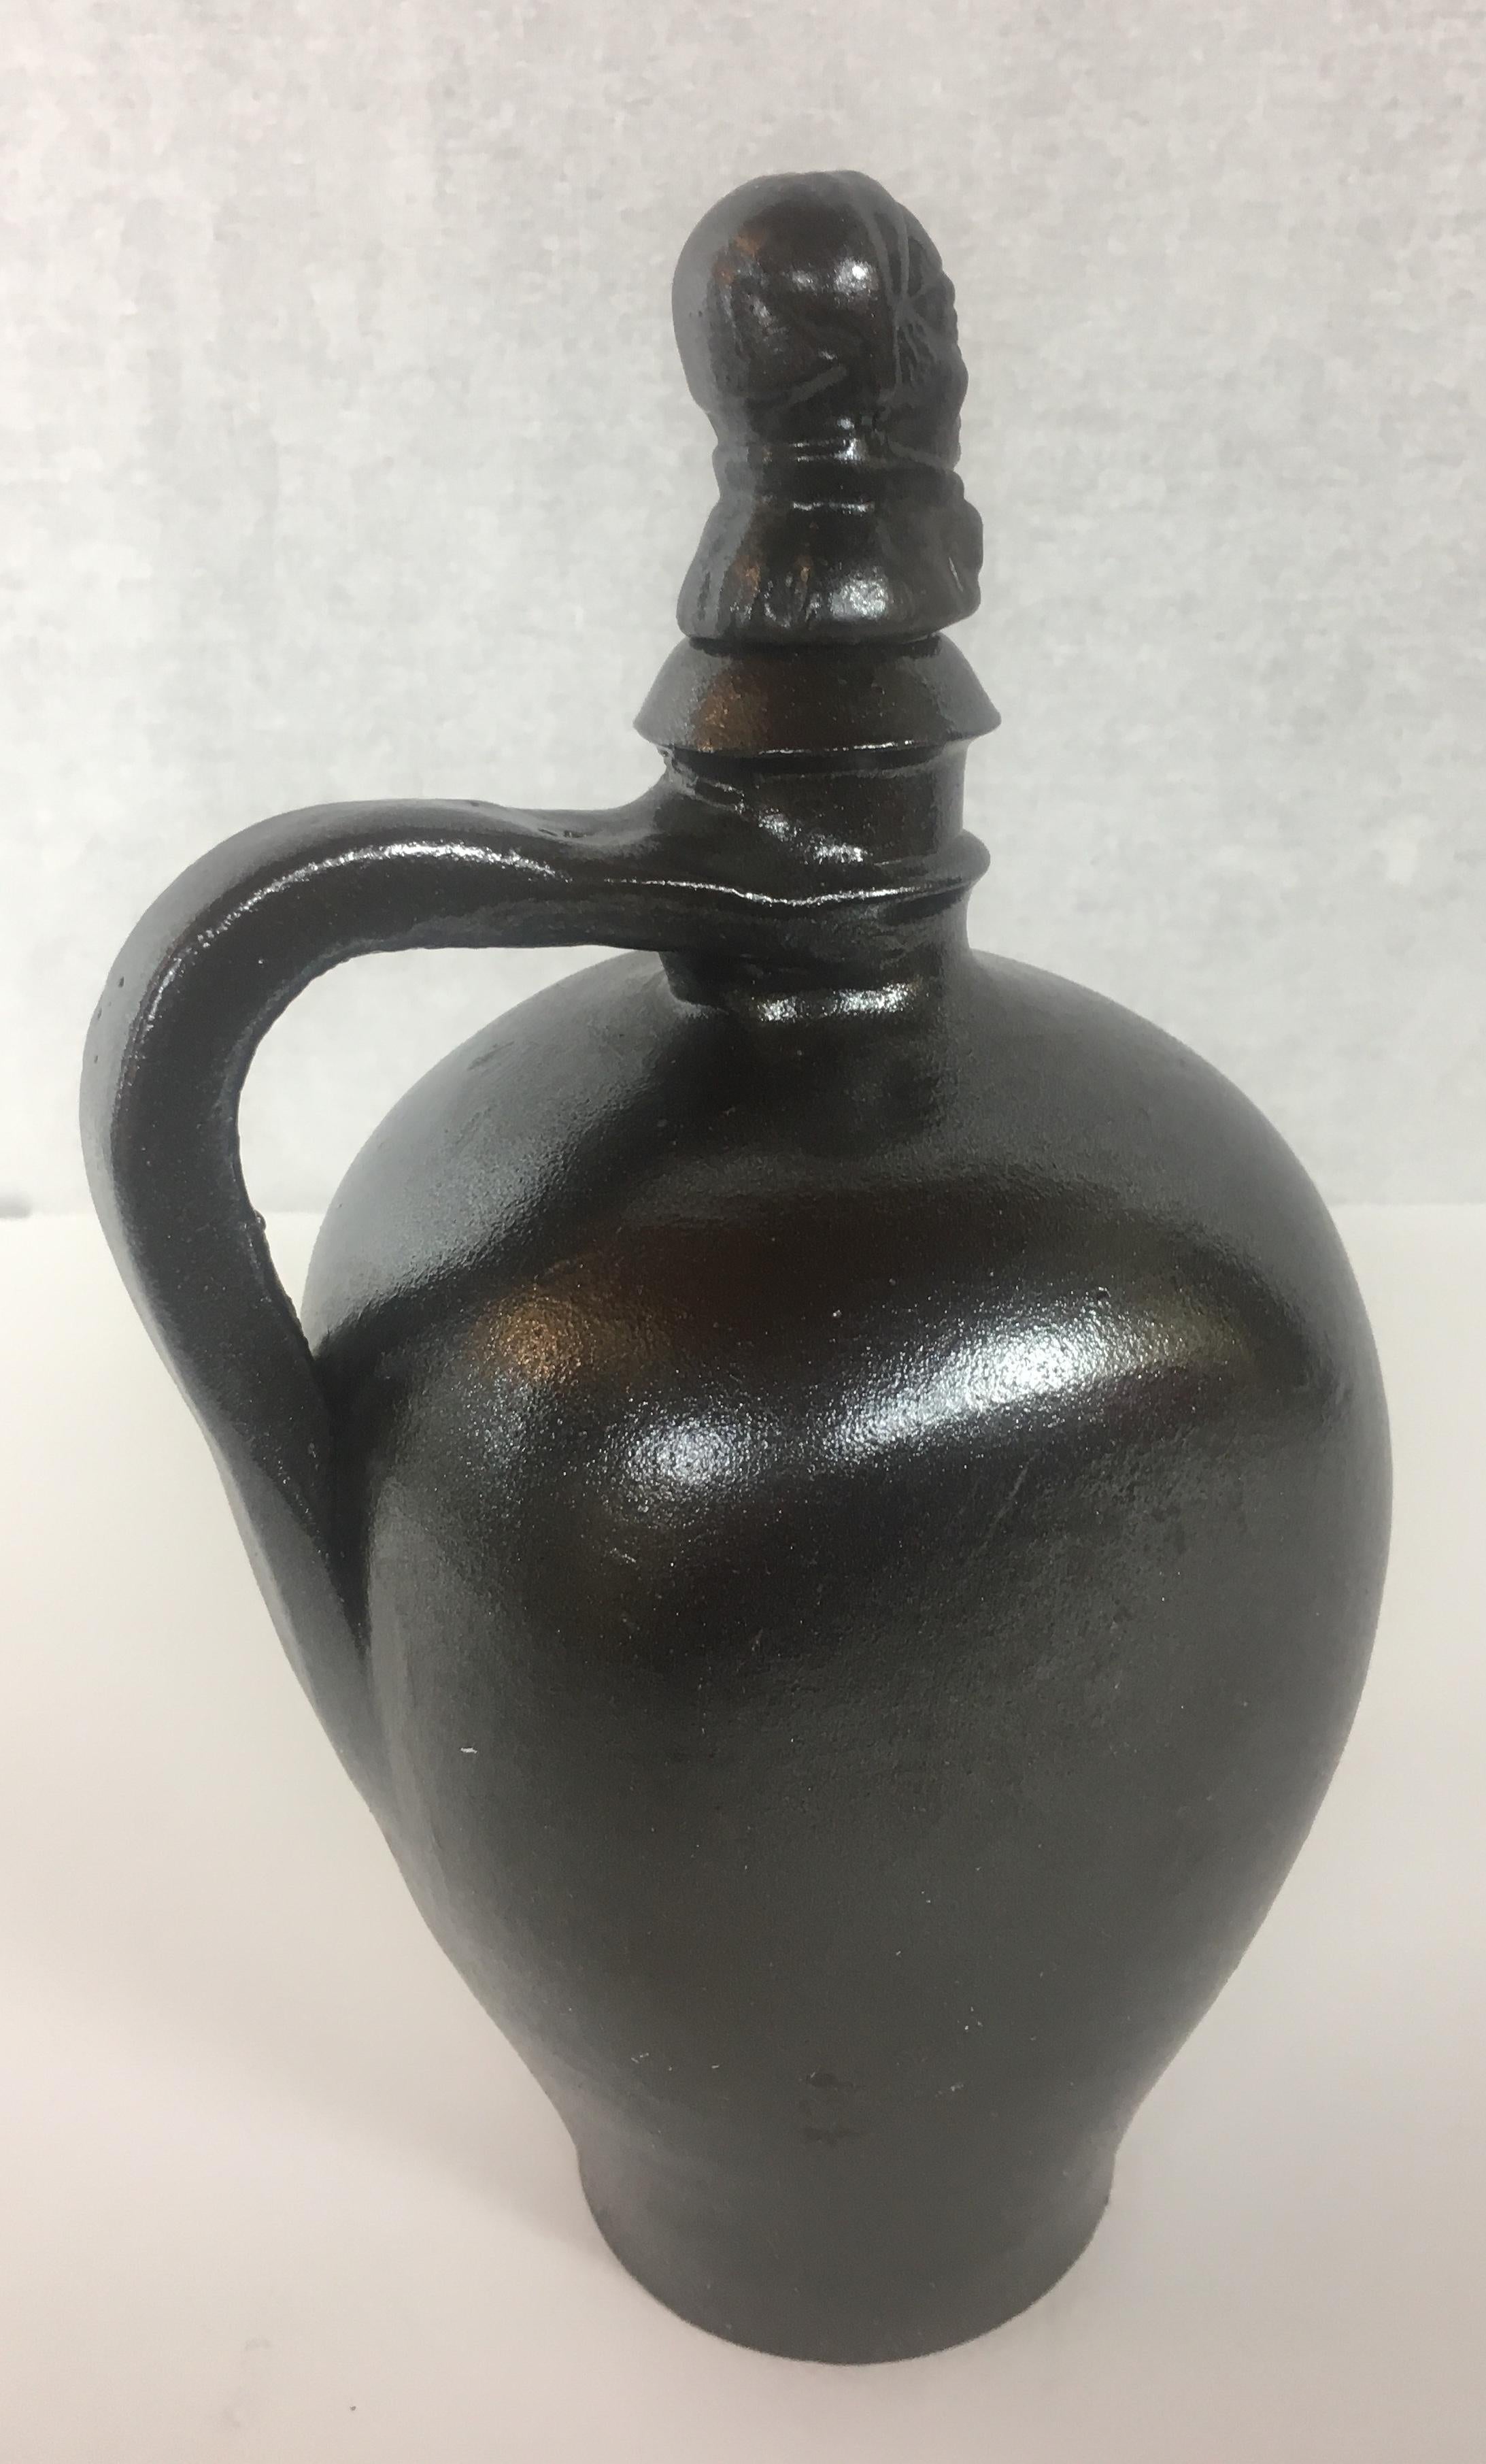 A very good quality French midcentury black matte decorative object.
Signed. 

The top is removable for if displaying in a more modern setting.
   